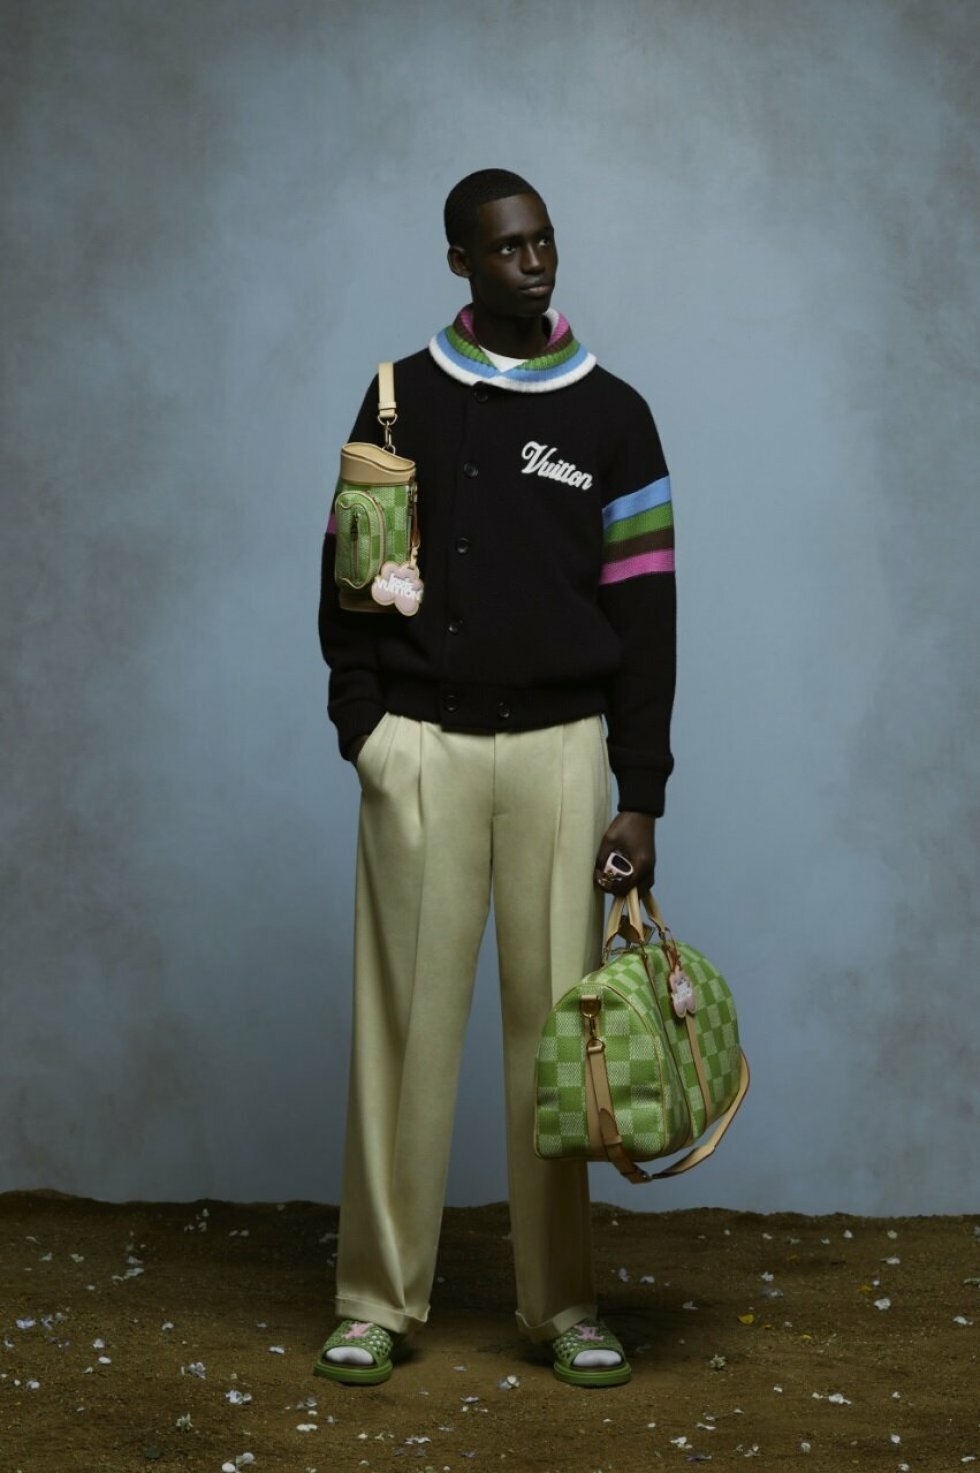 Louis Vuitton Spring 2024 Men?s Capsule Collection by Tyler, The Creator © Louis Vuitton ? All rights reserved - Tyler, The Creator giver sit spin på Louis Vuittons herrekollektion